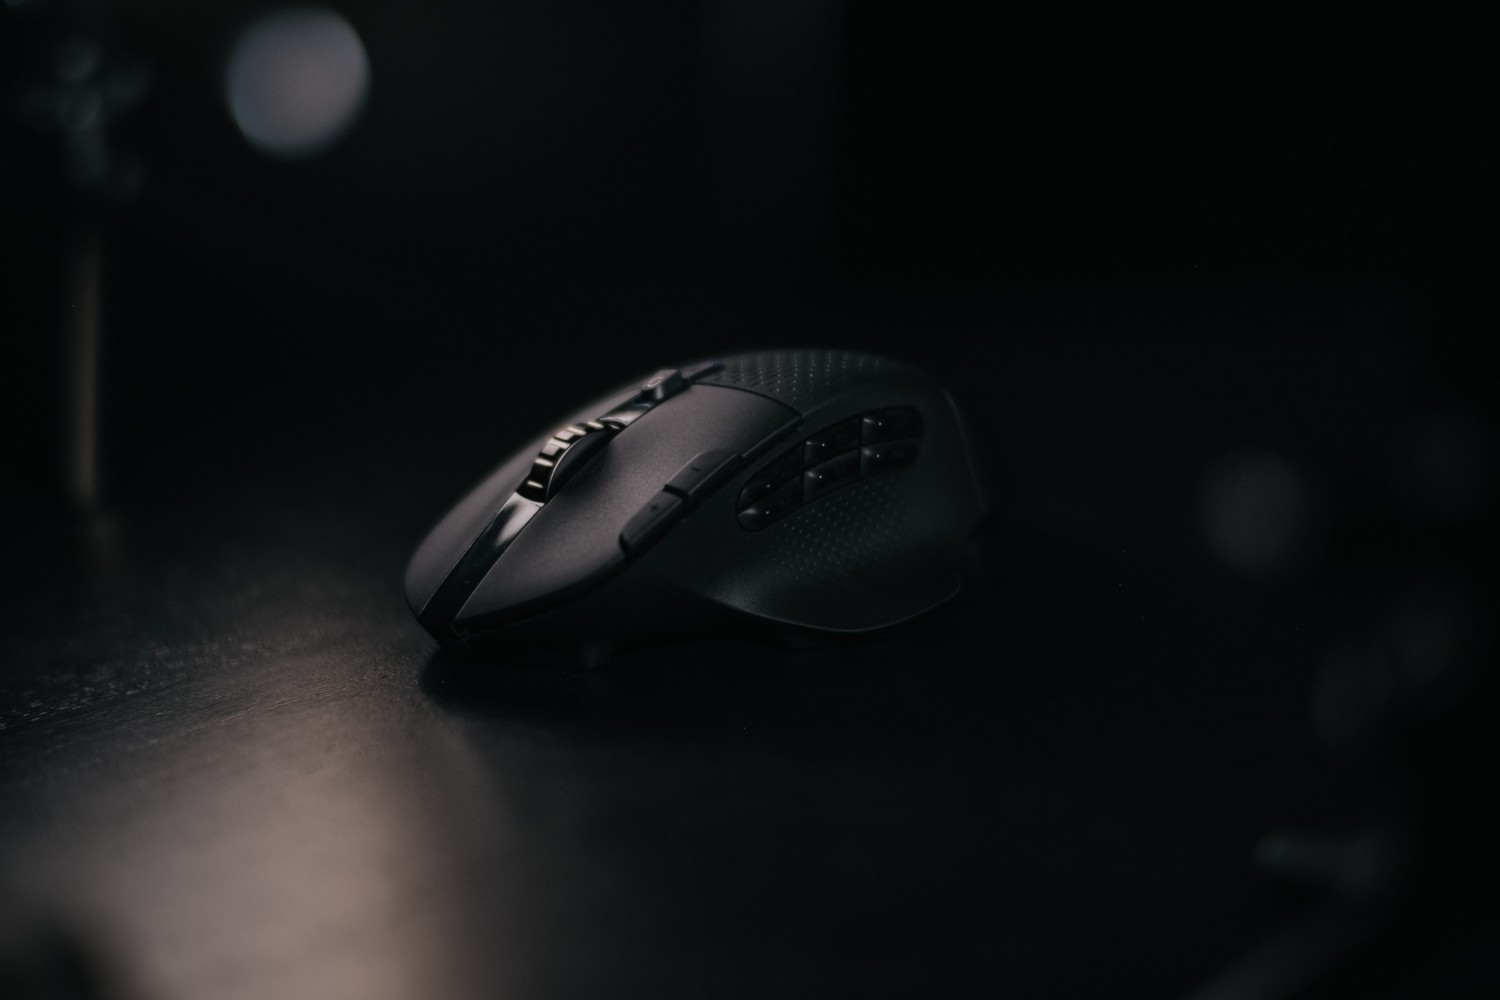 Logitech G604 Lightspeed Wireless Gaming Mouse Review: A Killer MMO Mouse